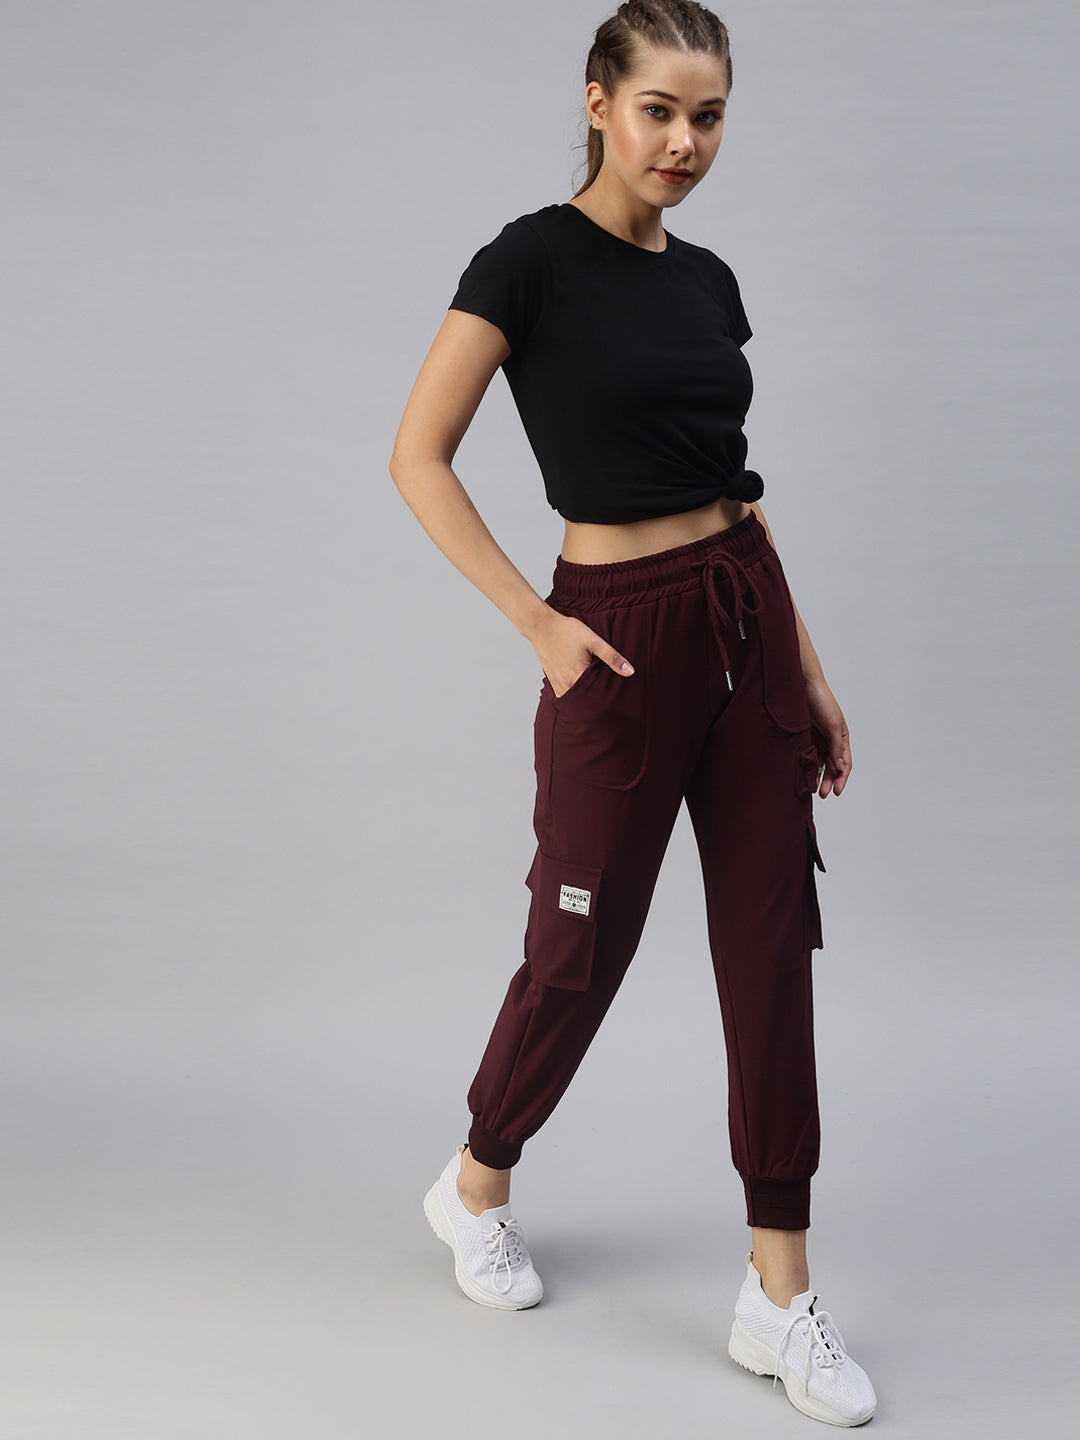 Women's Burgundy Solid Joggers Track Pant